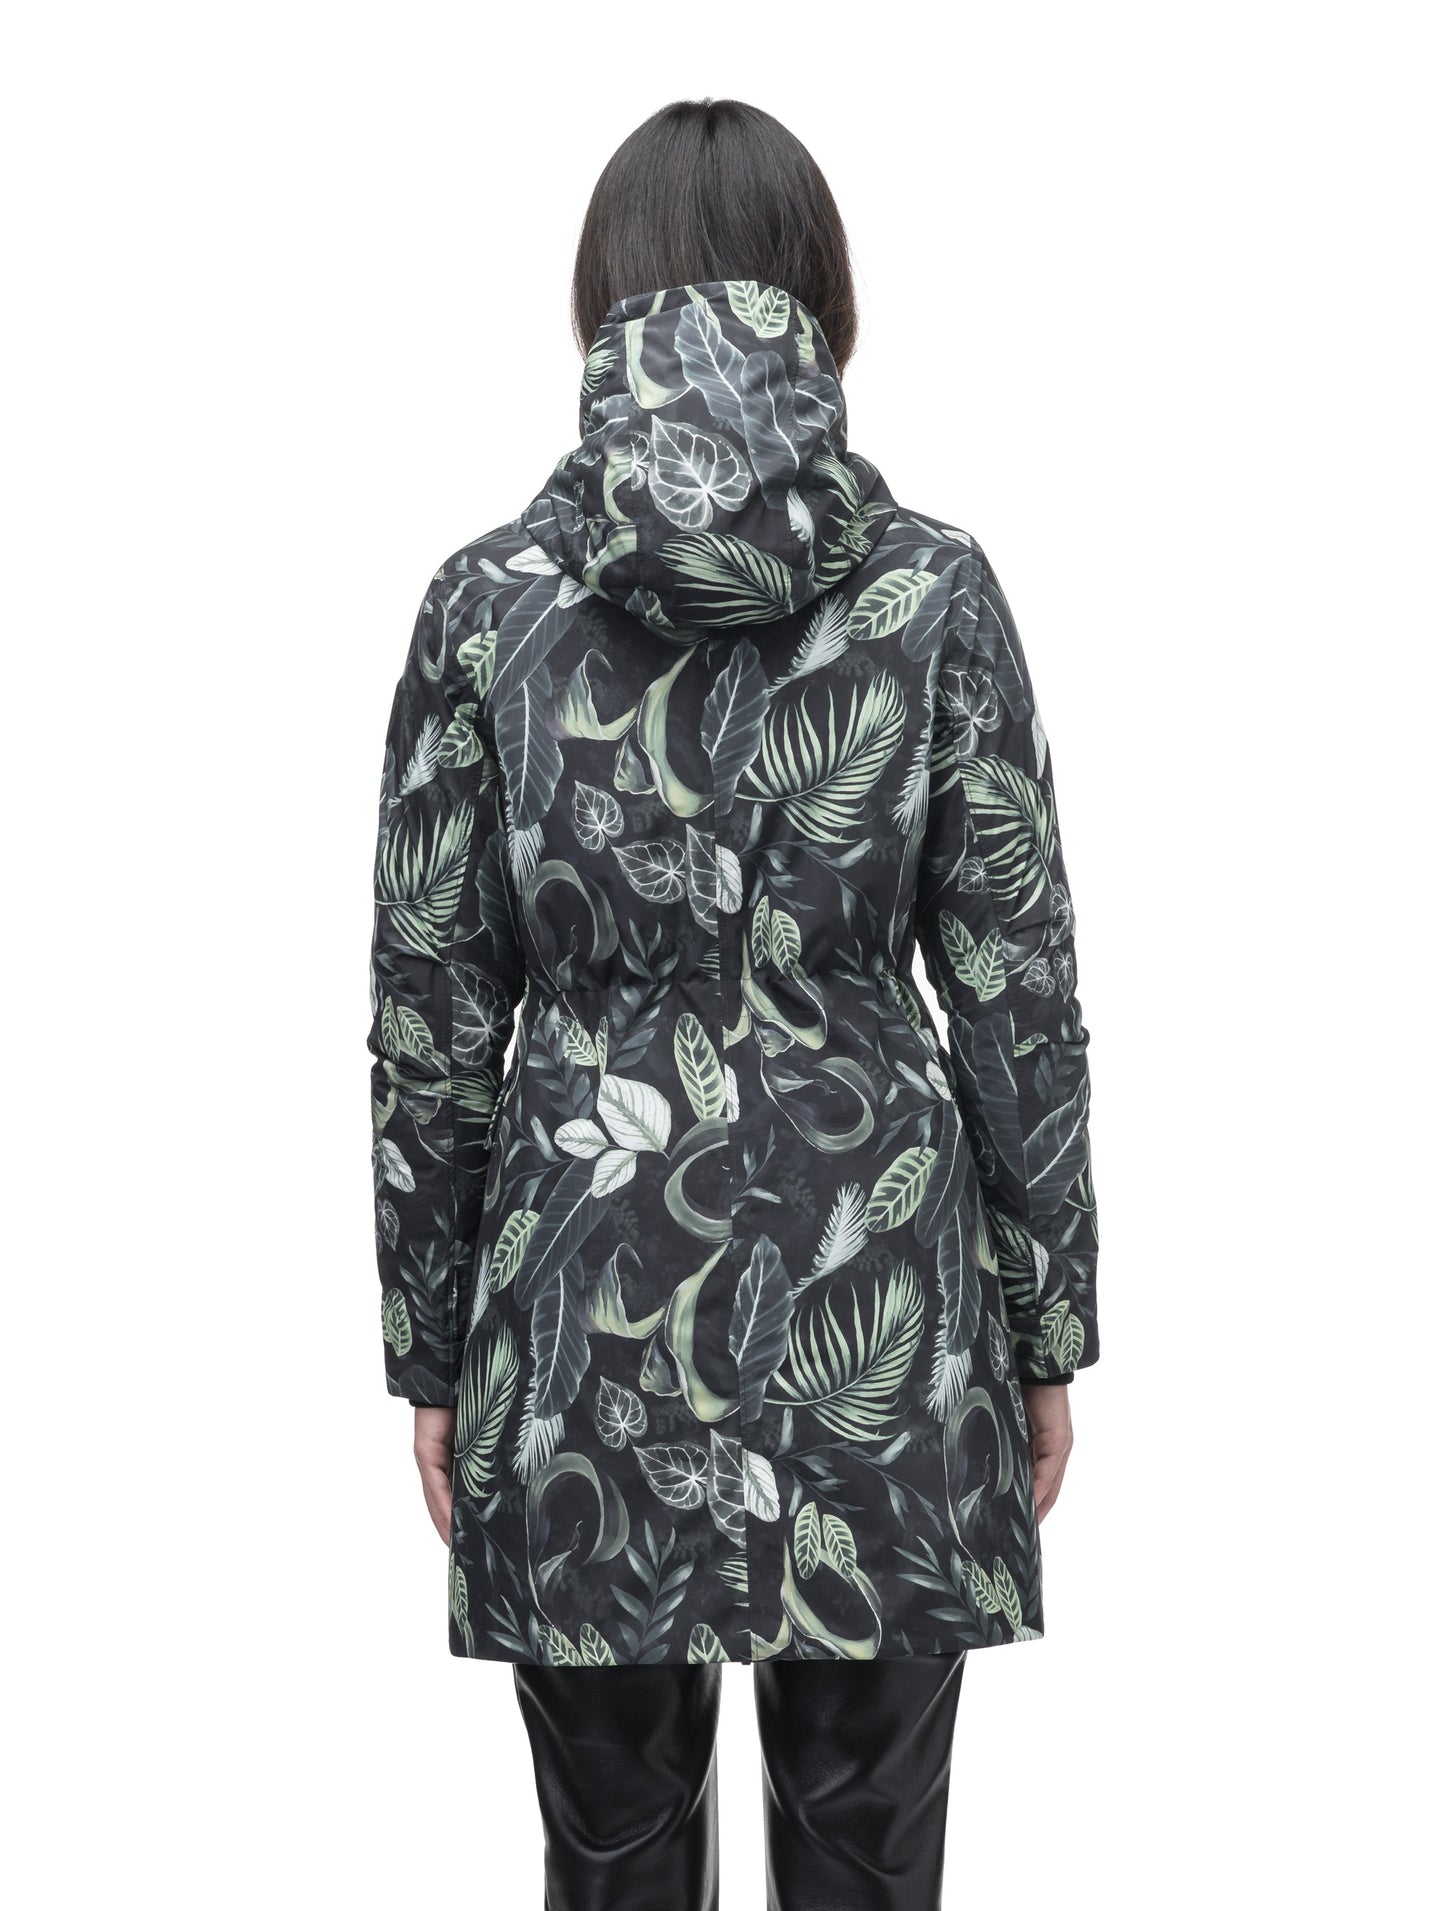 Romeda Ladies Mid Thigh Parka in thigh length, Canadian duck down insulation, non-removable hood with removable fur ruff trim, and two-way front zipper, in Foliage